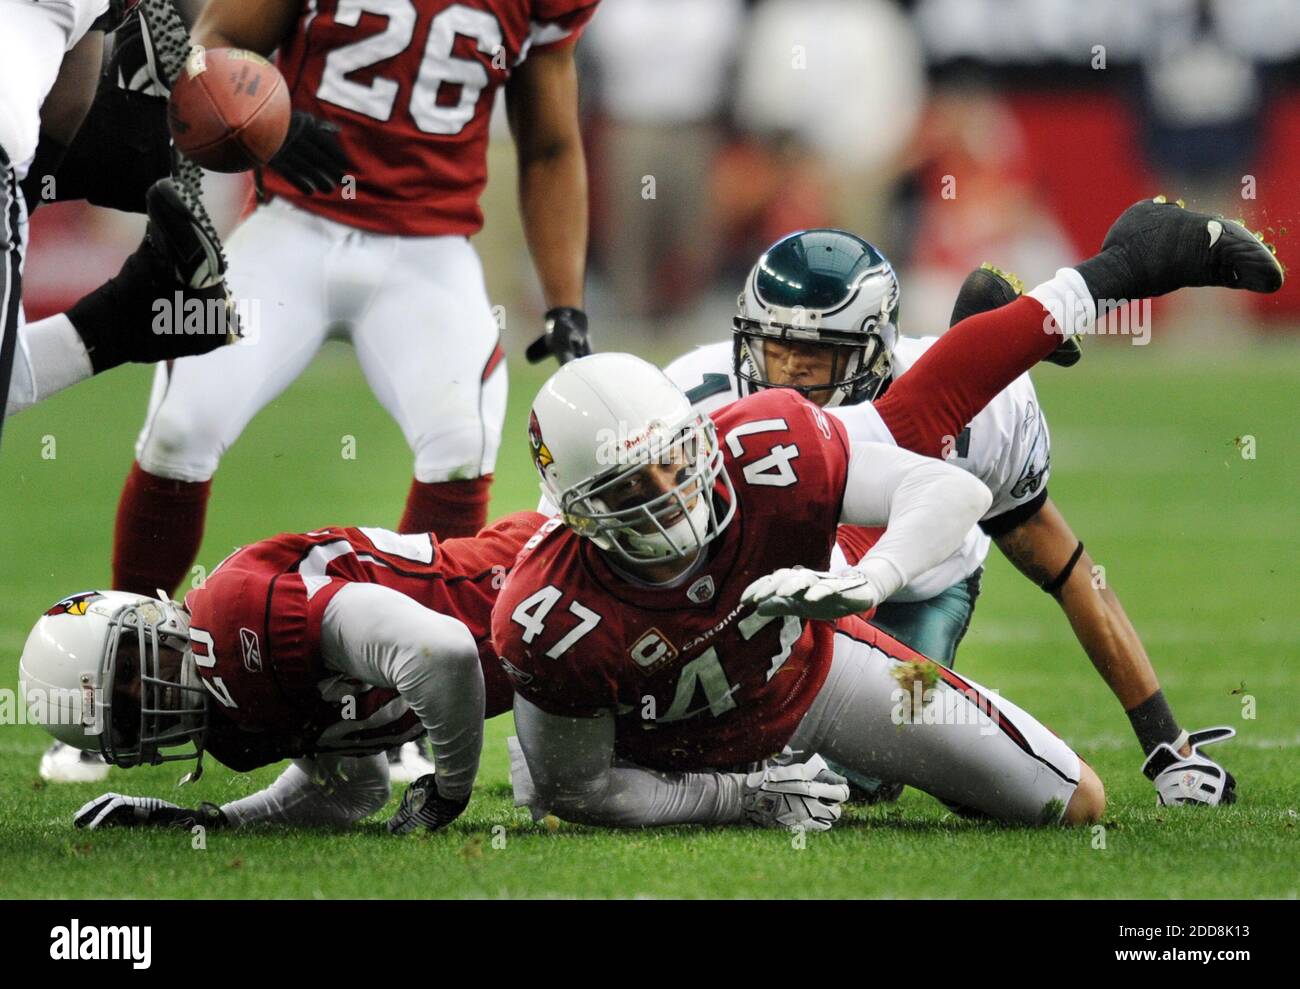 NO FILM, NO VIDEO, NO TV, NO DOCUMENTARY - Arizona Cardinals safety Aaron Francisco (47) fumbles the ball after intercepting a pass by Philadelphia Eagles quarterback Donovan McNabb in the first quarter of the NFC Championship at the University of Phoenix Stadium in Phoenix, AZ, USA on January 18, 2009. The Cardinals defeated the Eagles, 32-25. Photo by Clem Murray/Philadelphia Inquirer/MCT/Cameleon/ABACAPRESS.COM Stock Photo